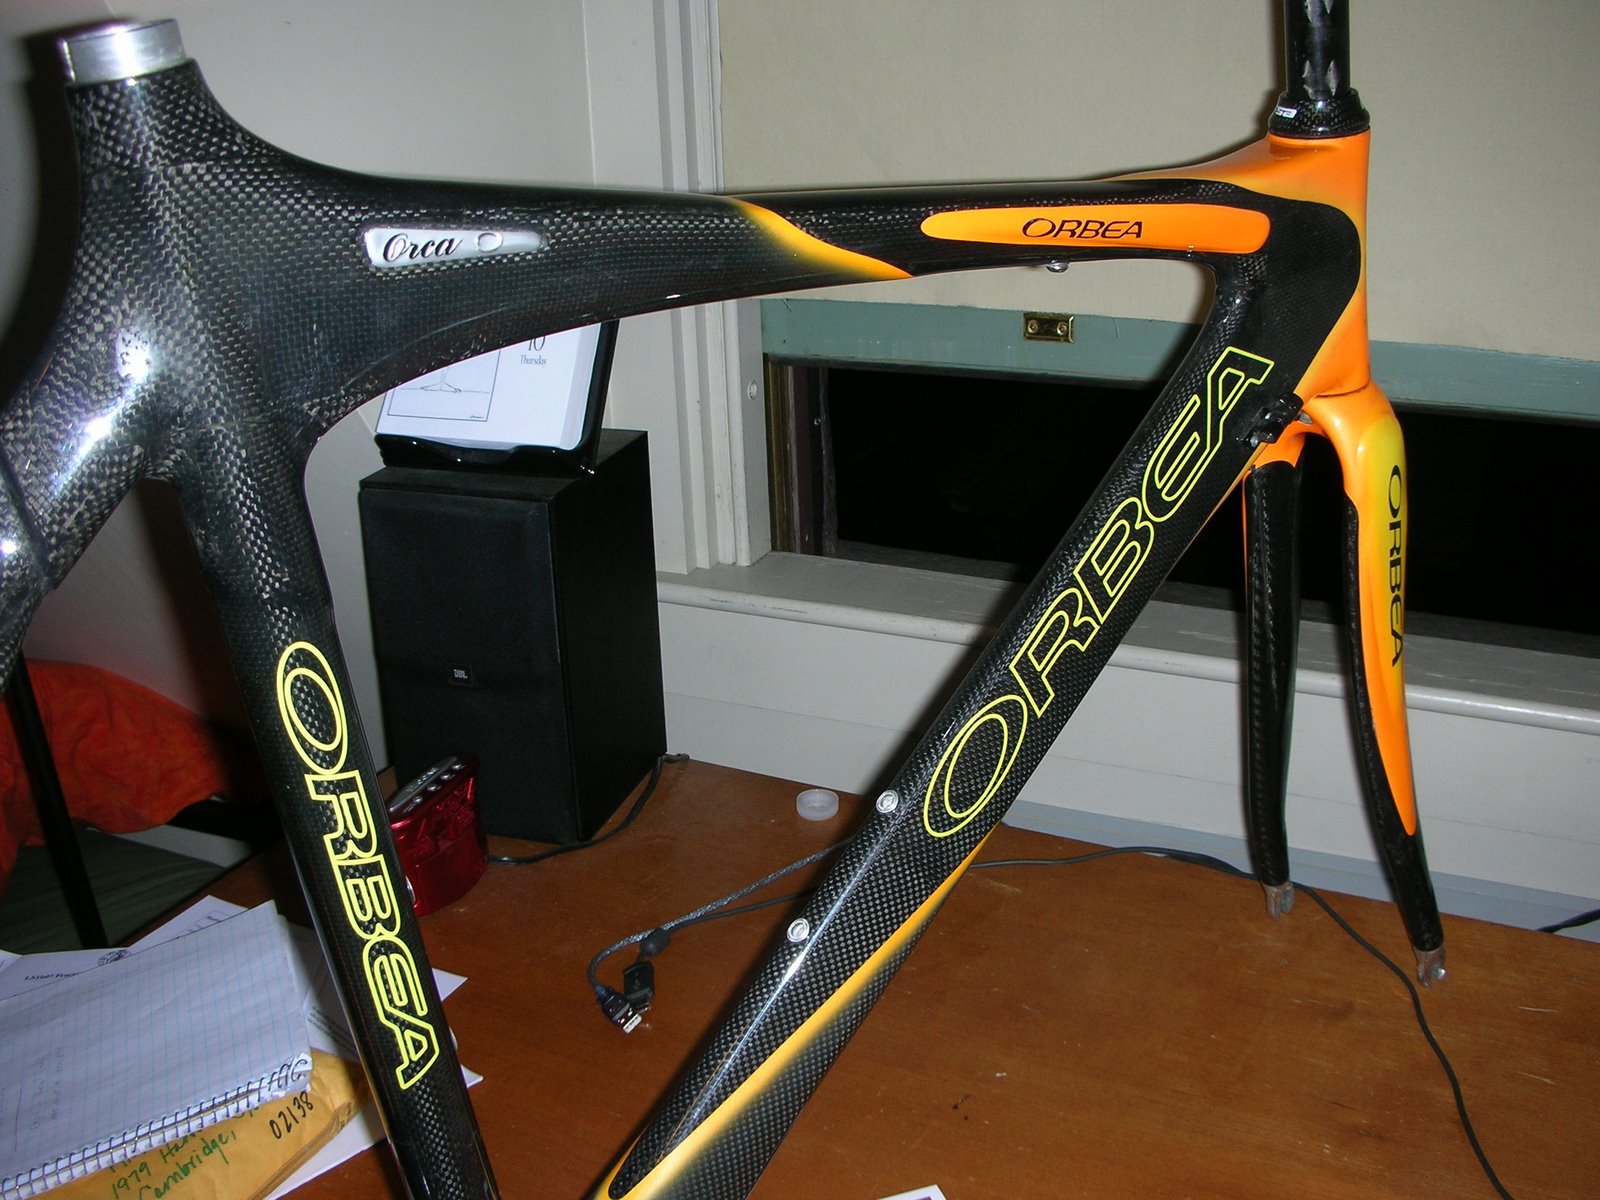 [the+new+orbea!]